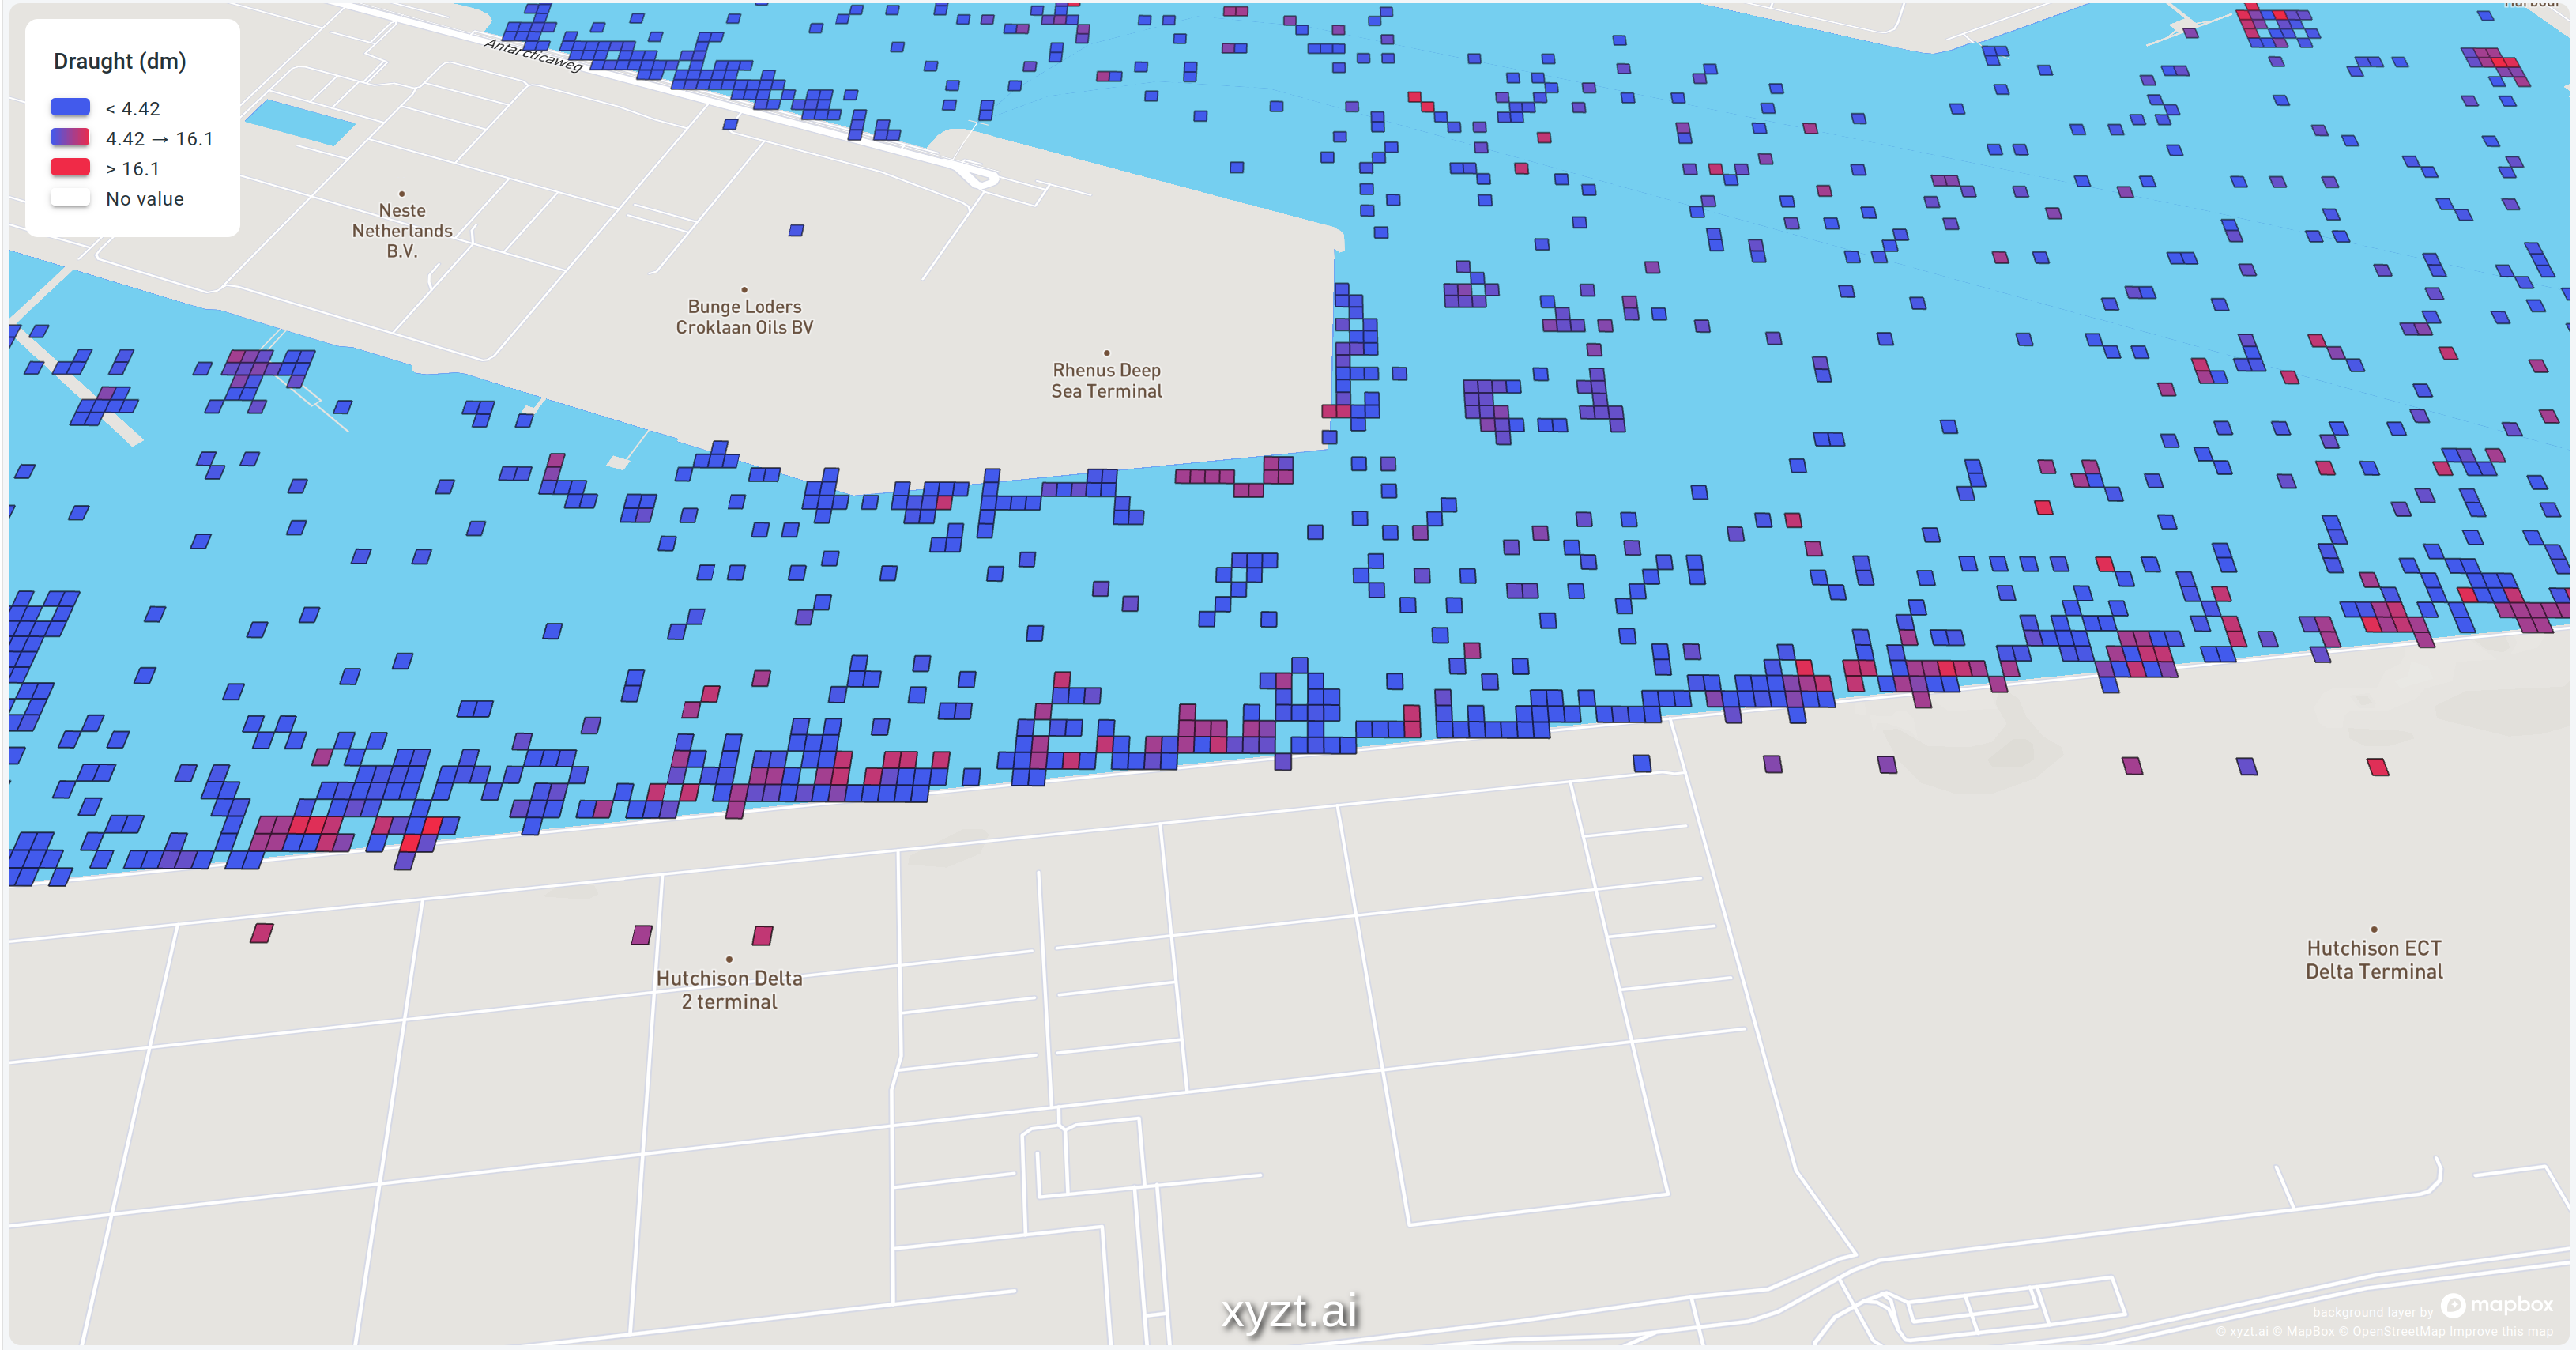 Maritime data in the Port of Rotterdam showing the draught of the vessels using a gradient color map. Data provided by Spire Maritime and visualized by xyzt.ai.